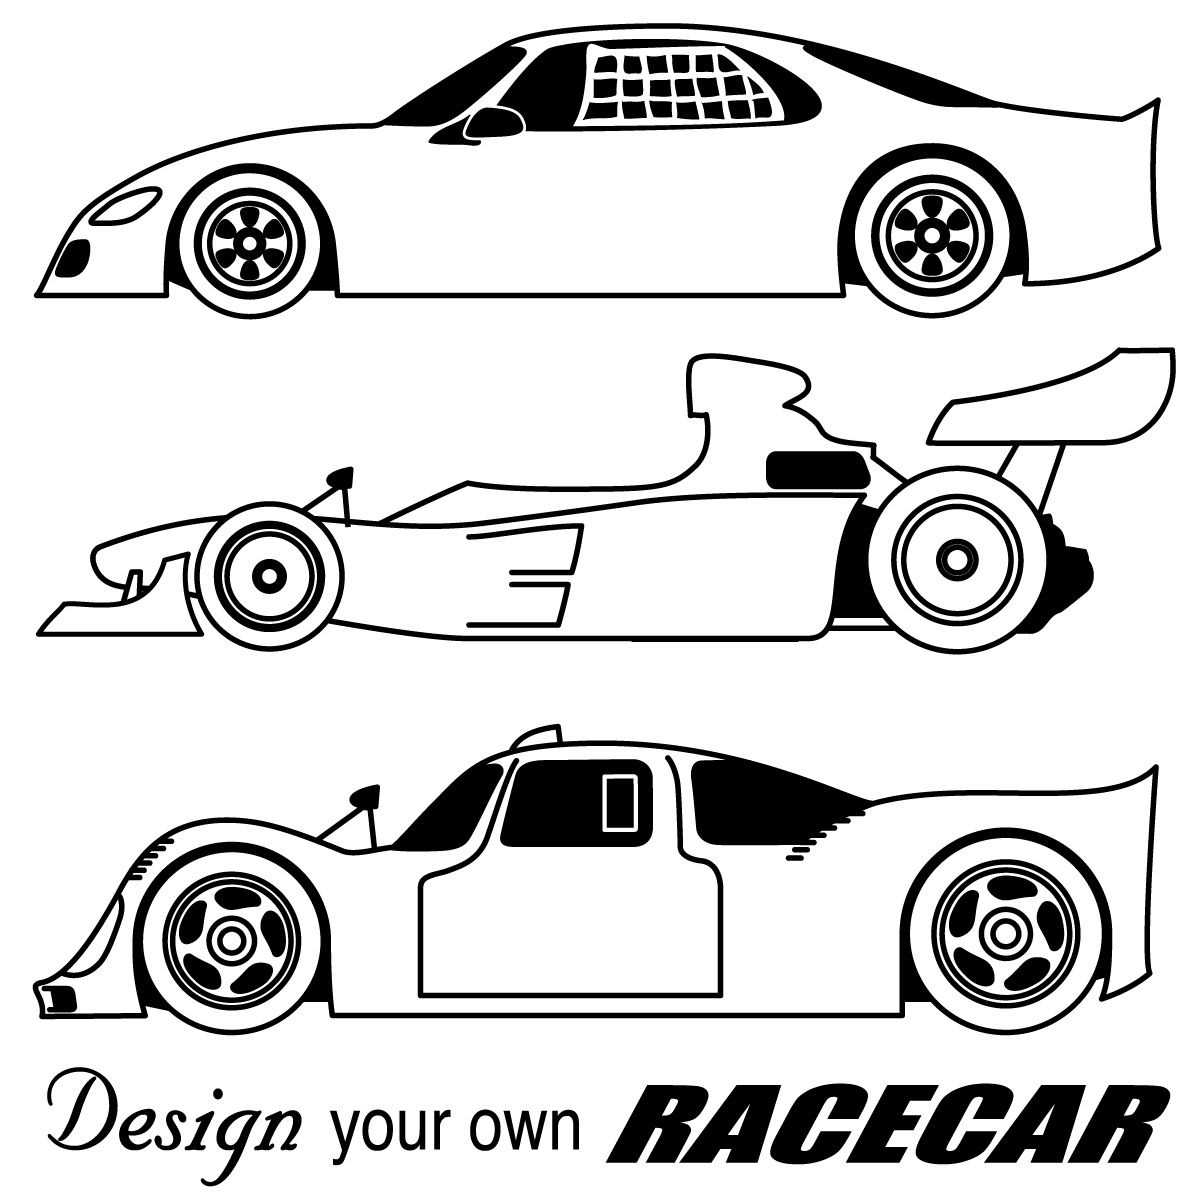 blank-race-car-coloring-pages-intended-for-blank-race-car-templates